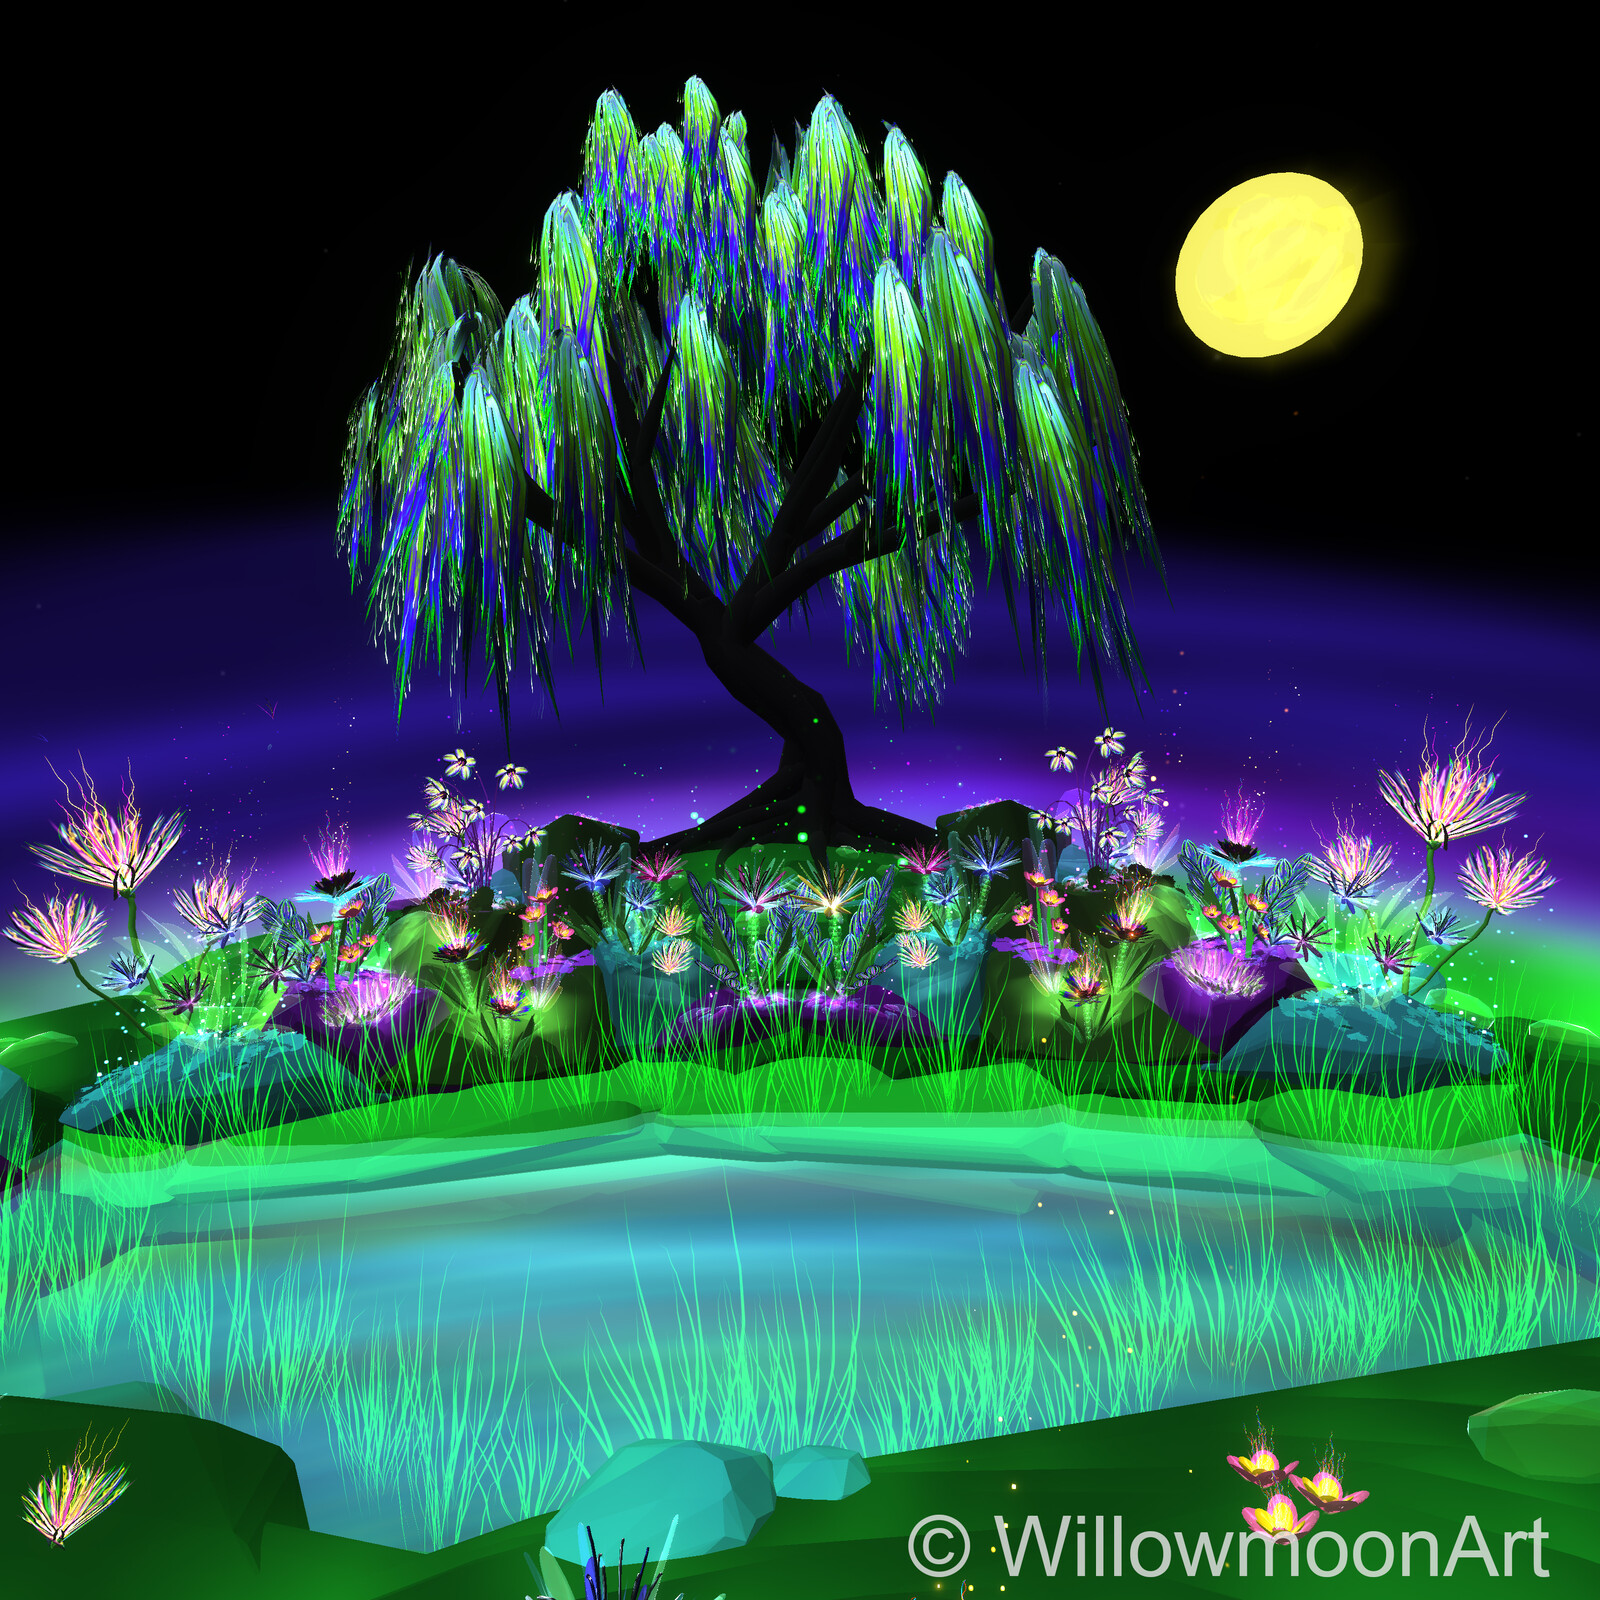 Song of the Willow Tree